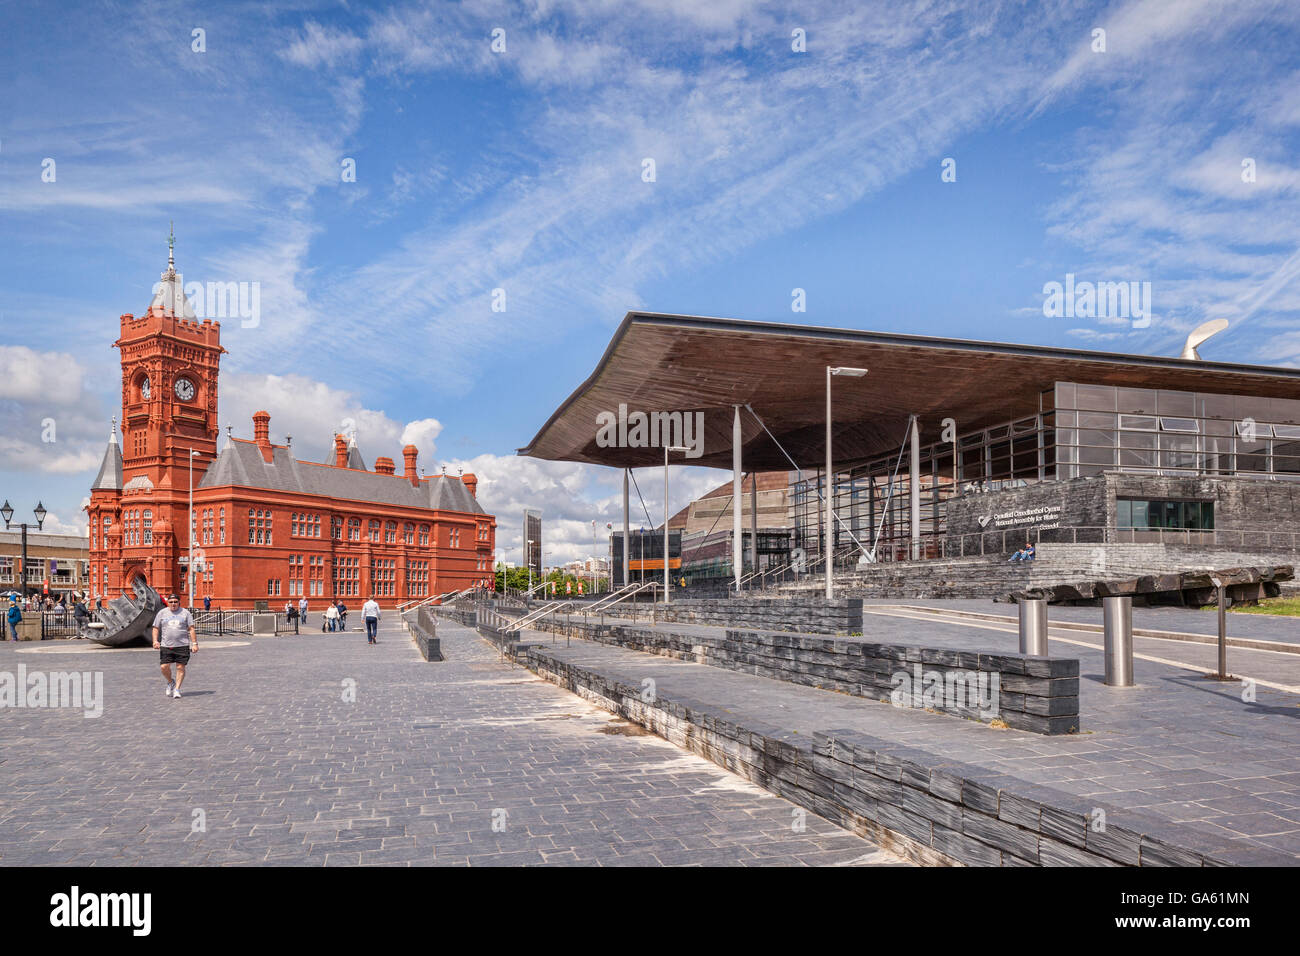 27 June 2016: Cardiff, Wales - The Pierhead Building, and the Senedd, the home of the National Assembly for Wales in Cardiff Bay Stock Photo